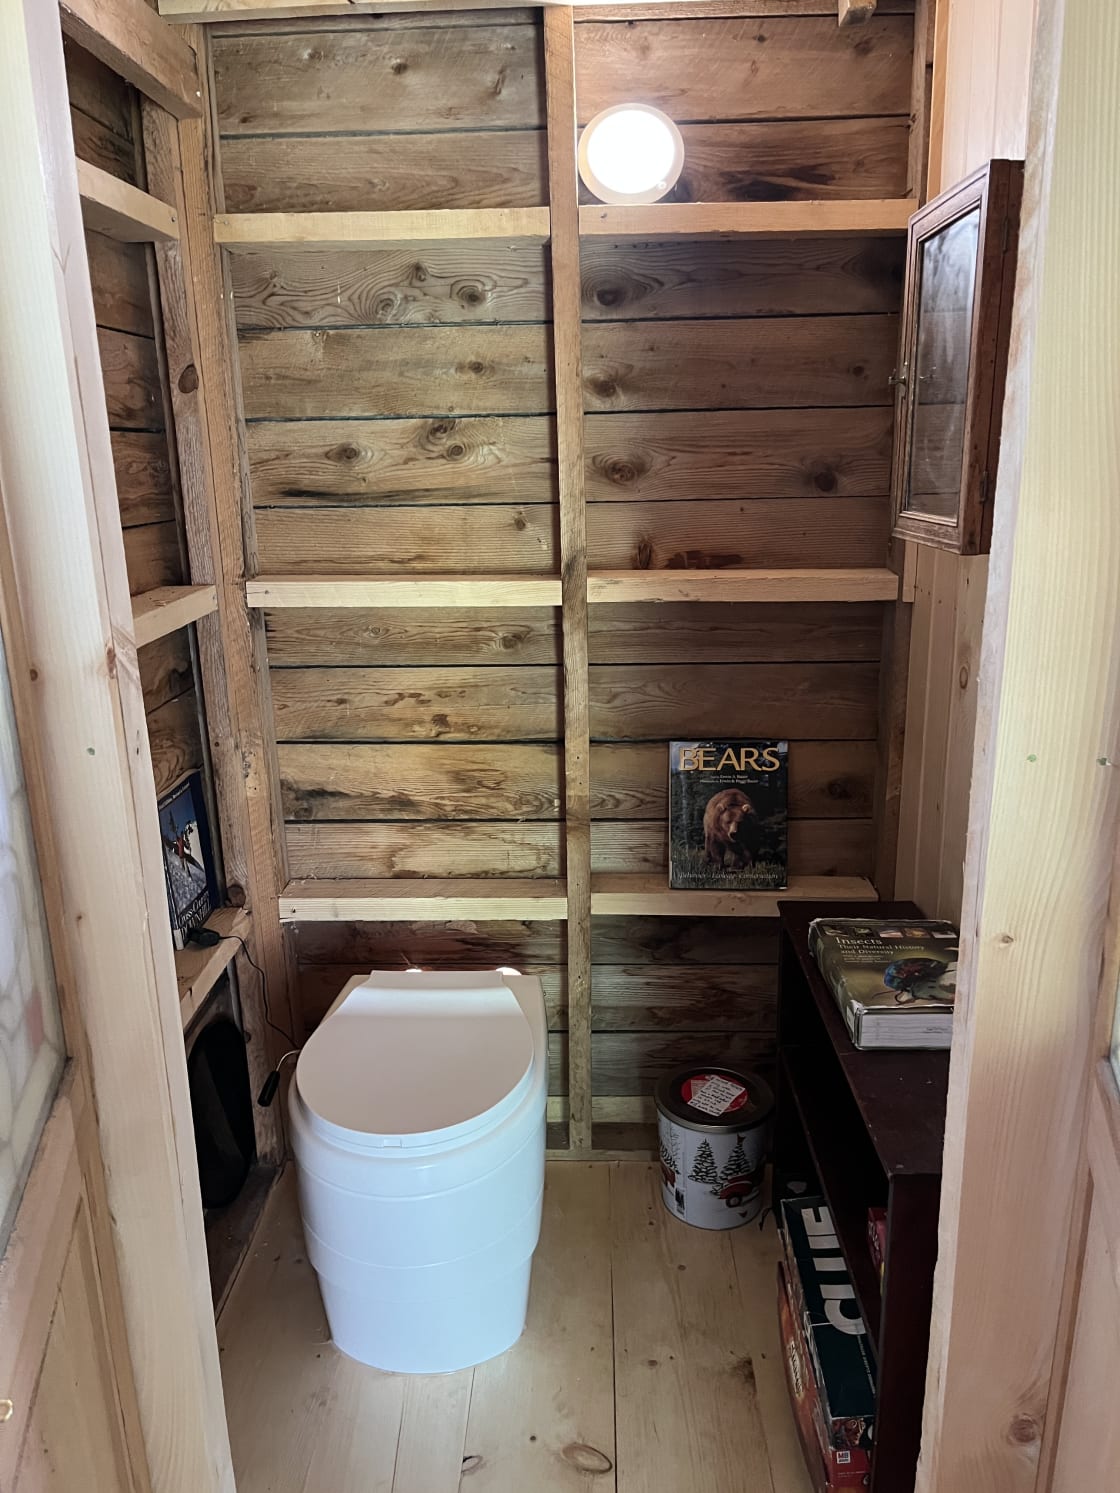 Brand new Thinktank composting toilet located inside cabin